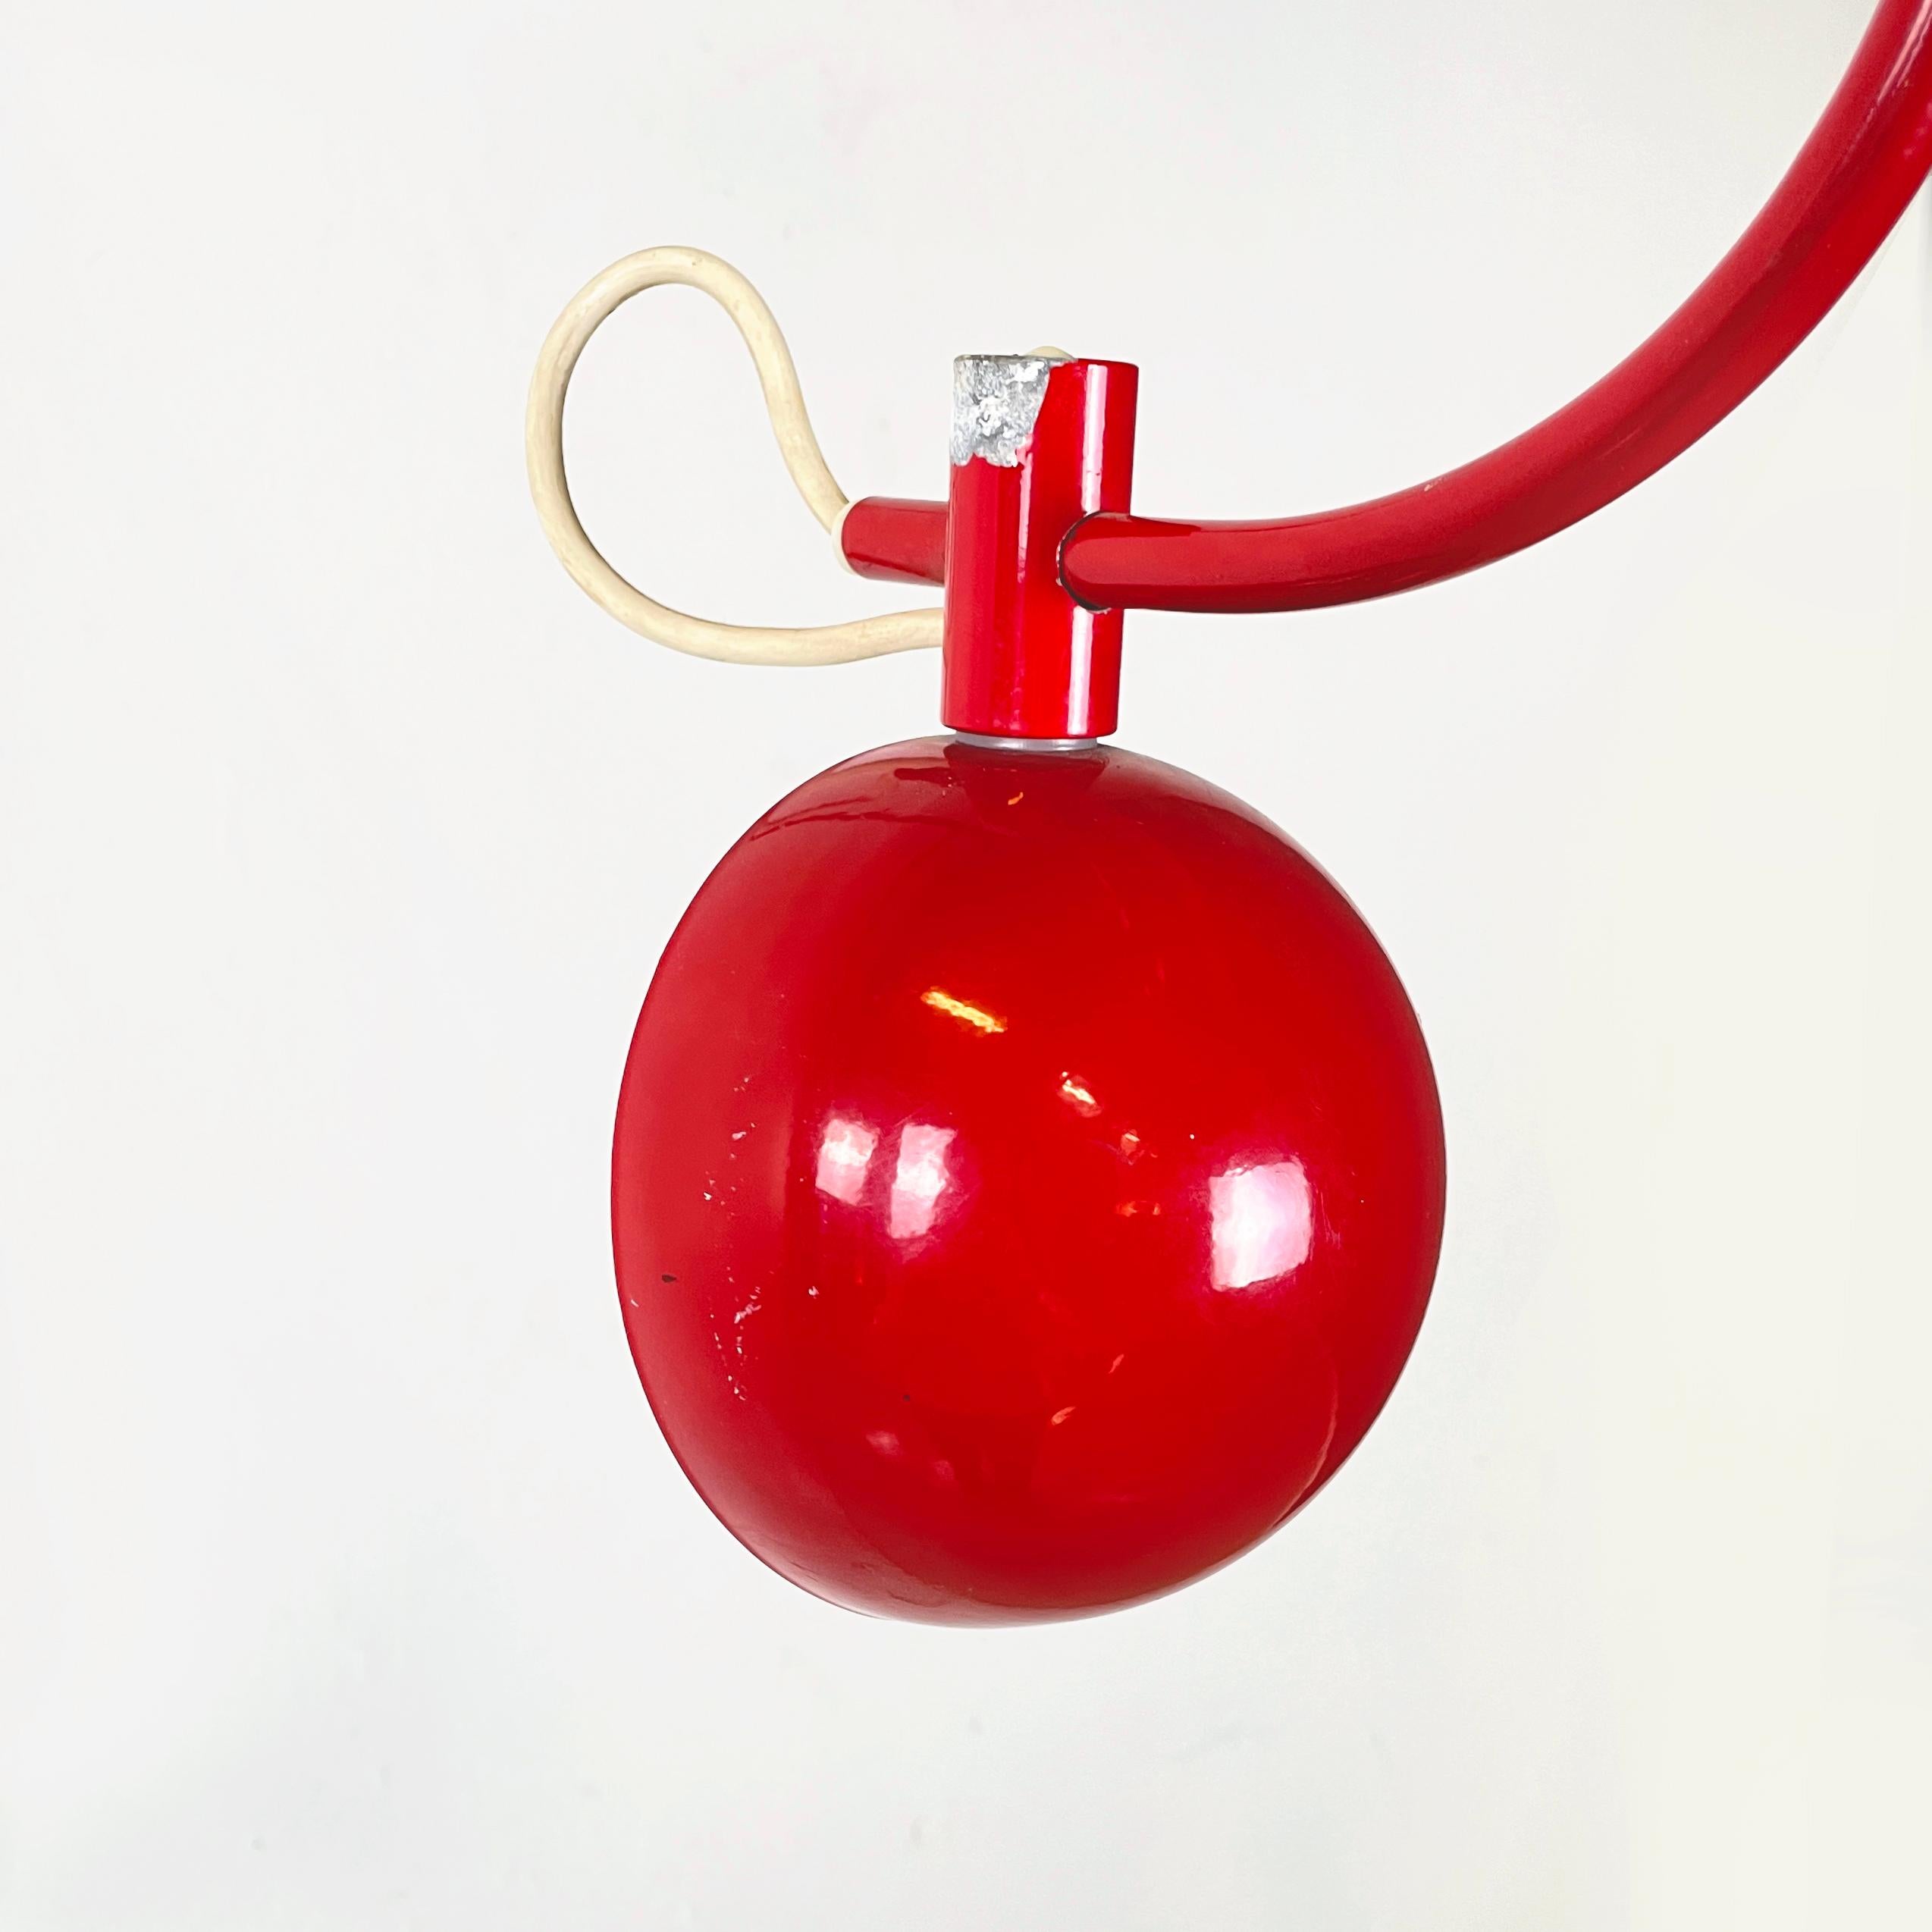 Italian modern Wall adjustable arm lamp in red and white metal, 1970s For Sale 3